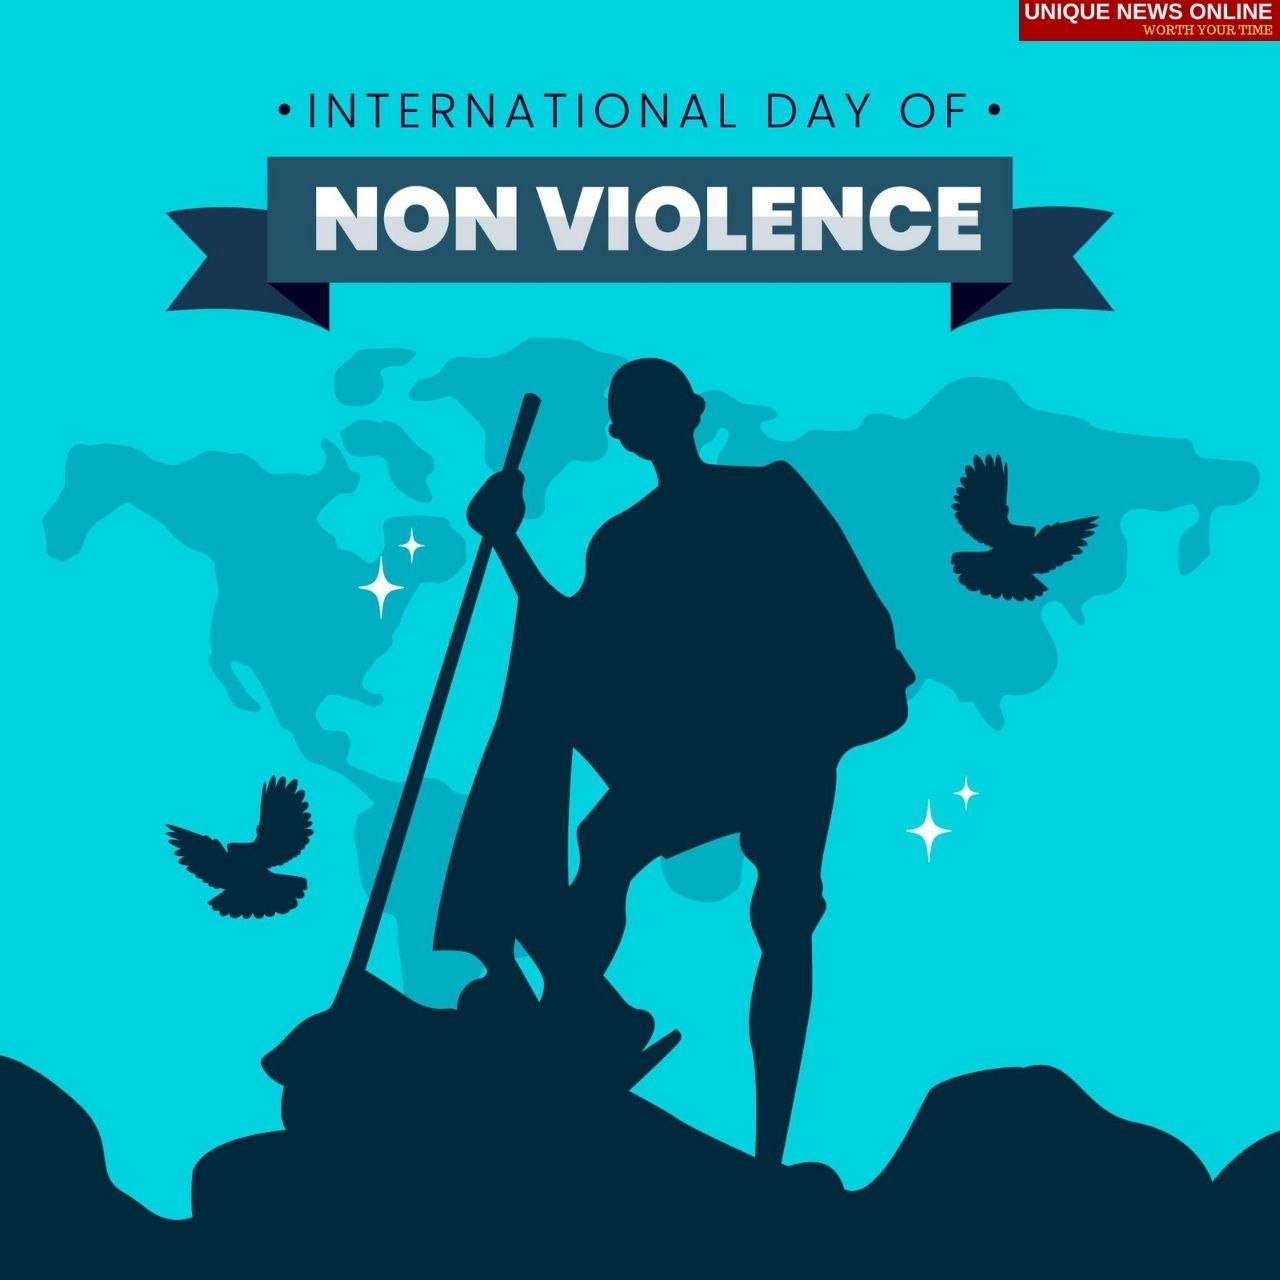 International Day of Non-Violence 2021 Quotes, Wishes, Messages, Greetings, Images, and HD Images to Share